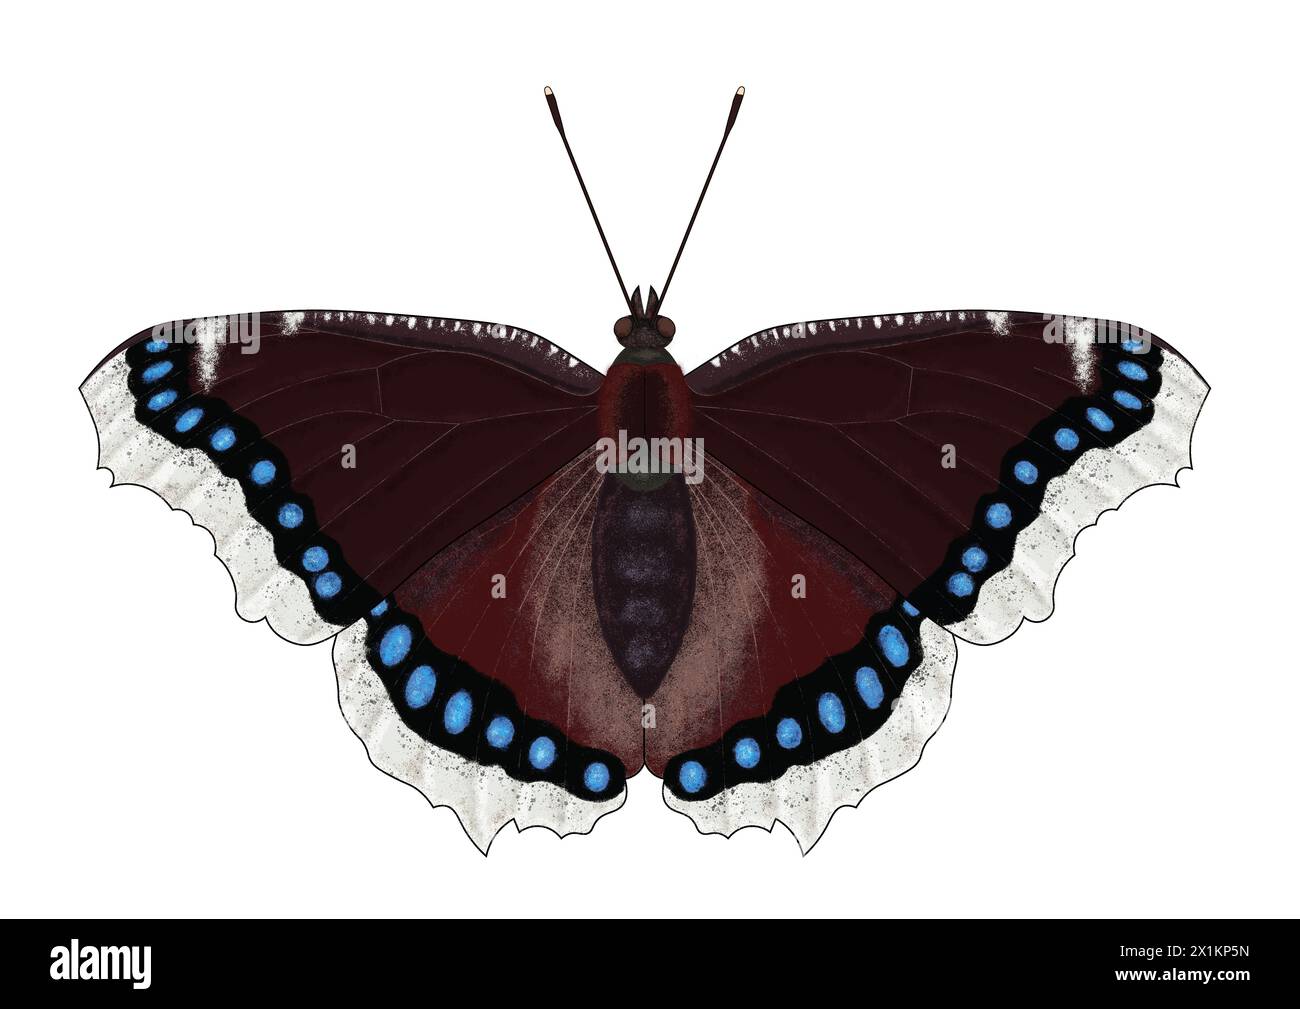 Digital illustration of the butterfly Nymphalis antiopa, known as the mourning cloak or the Camberwell beauty on white background Stock Photo